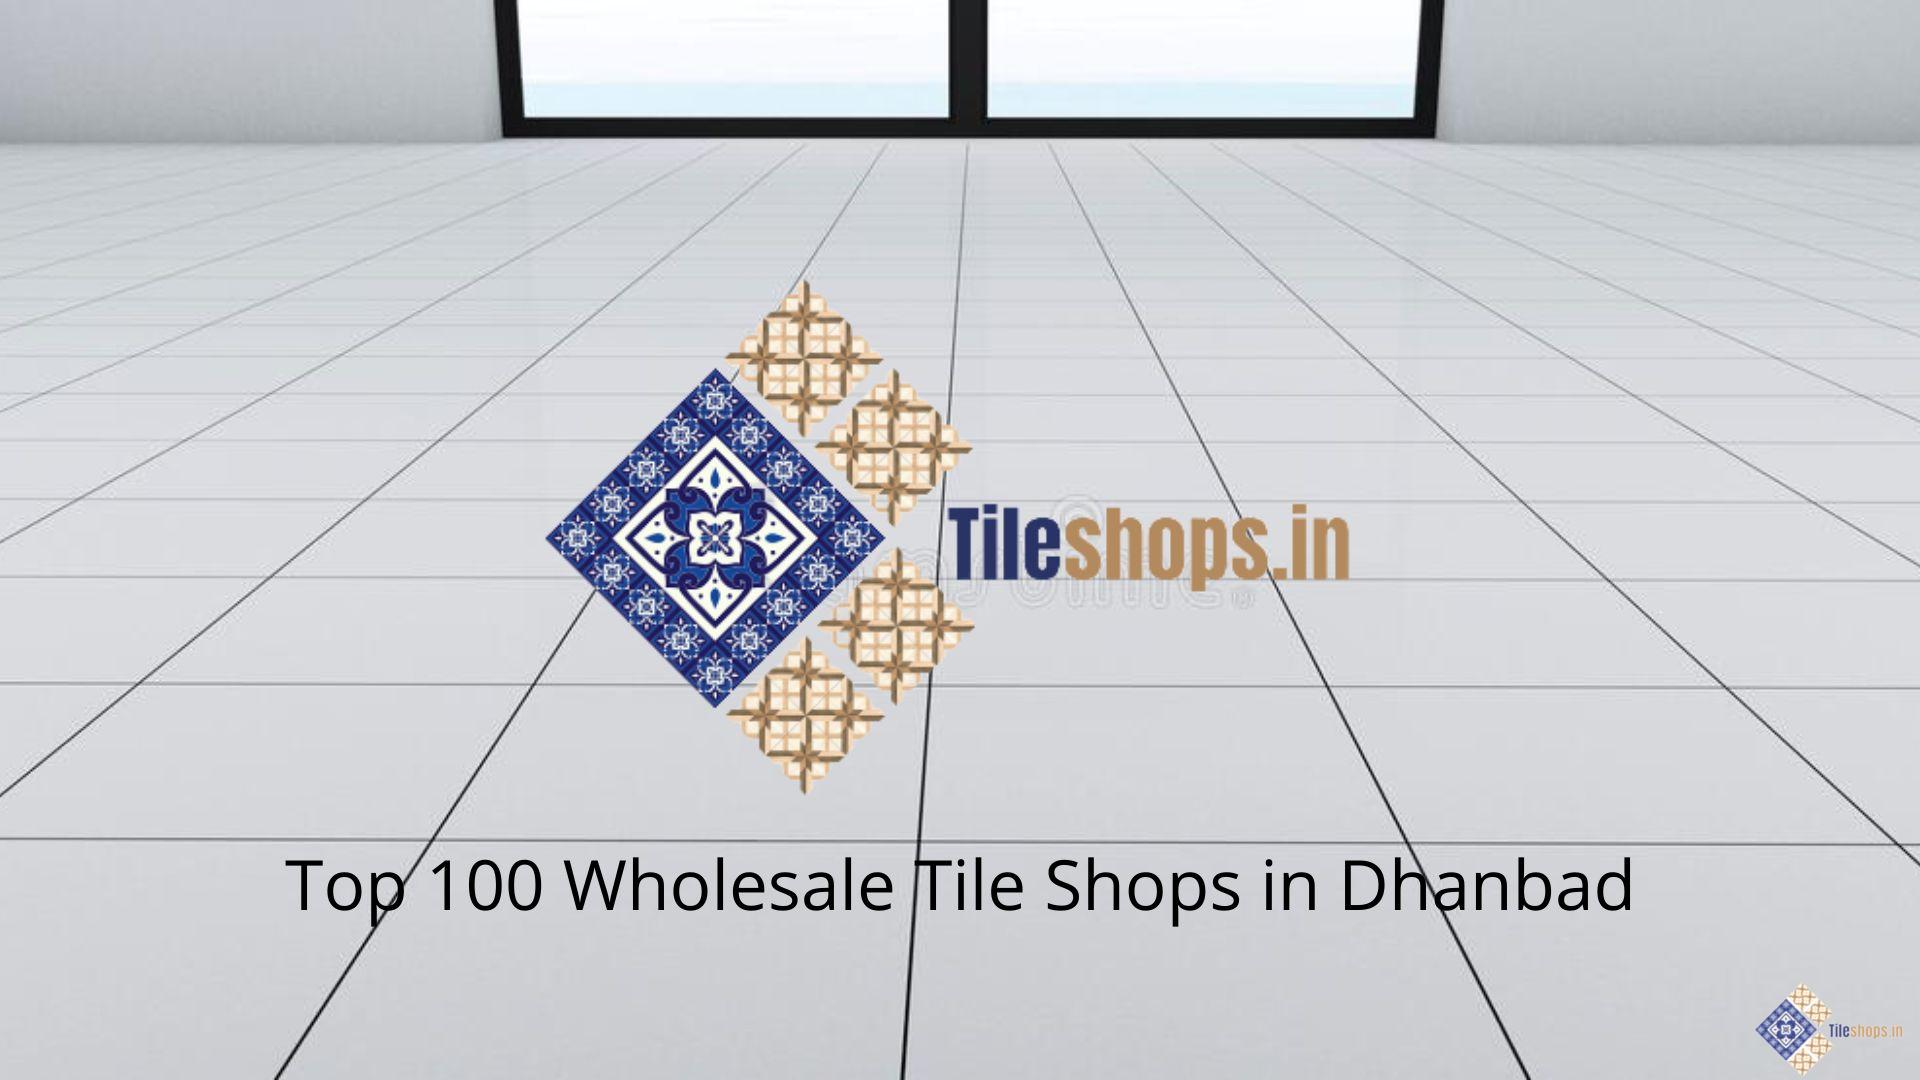 Top 100 Wholesale Tile Shops in Dhanbad